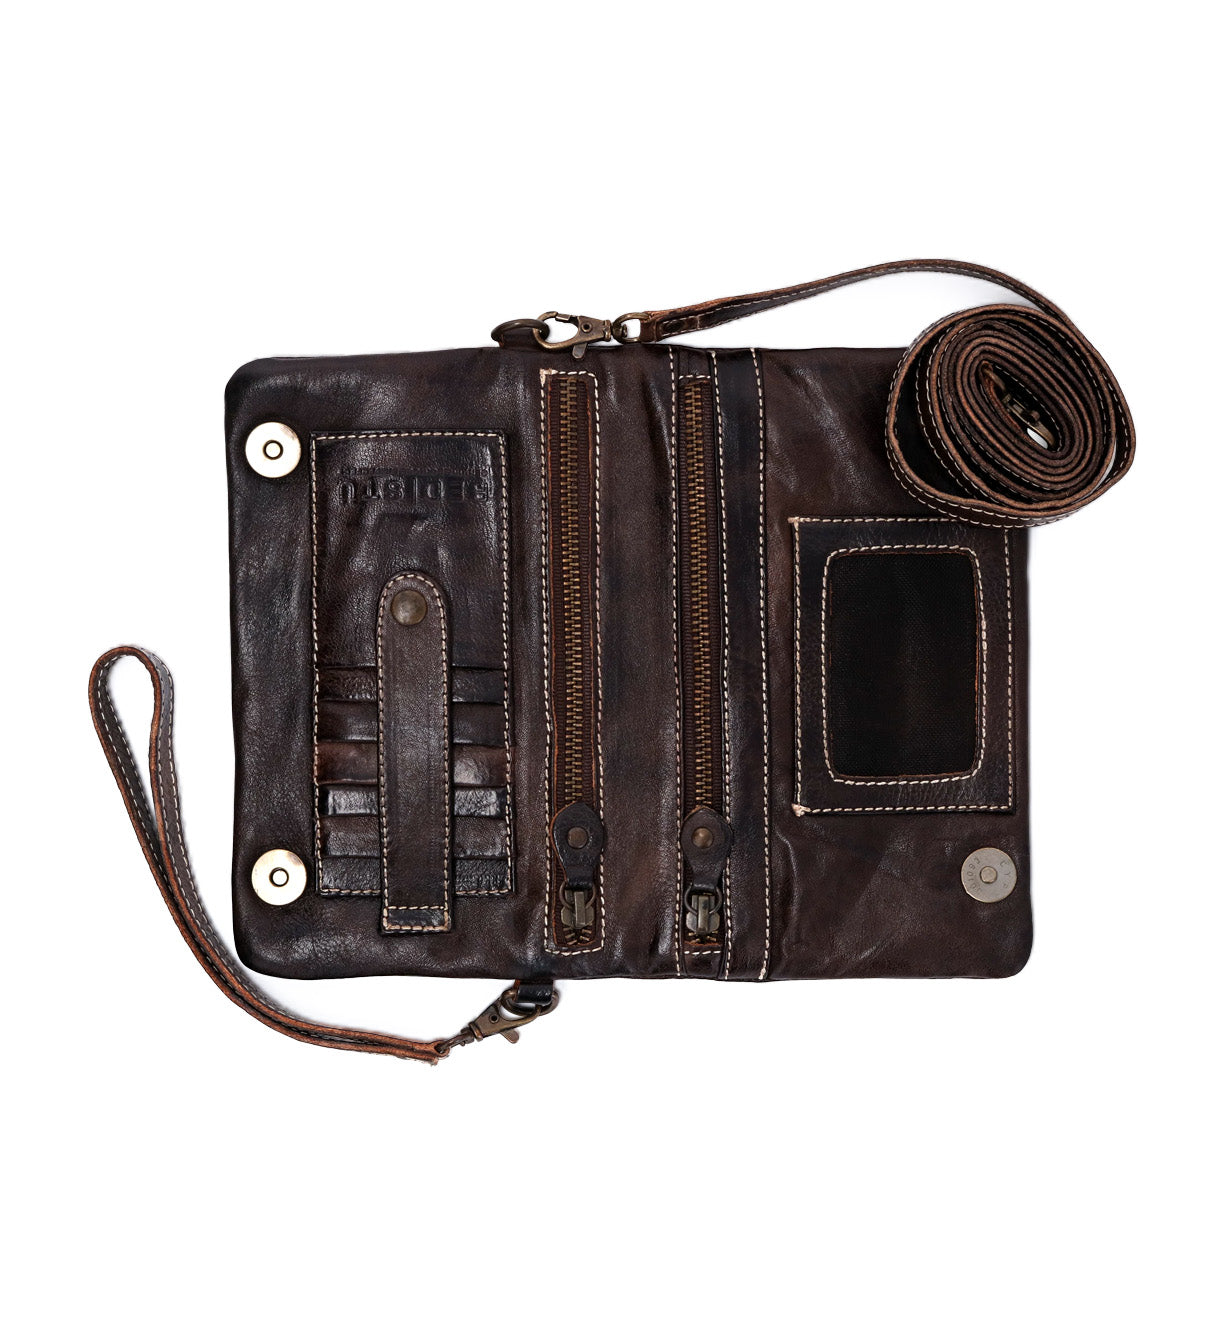 A brown leather Cadence wallet with two zippers and a strap by Bed Stu.